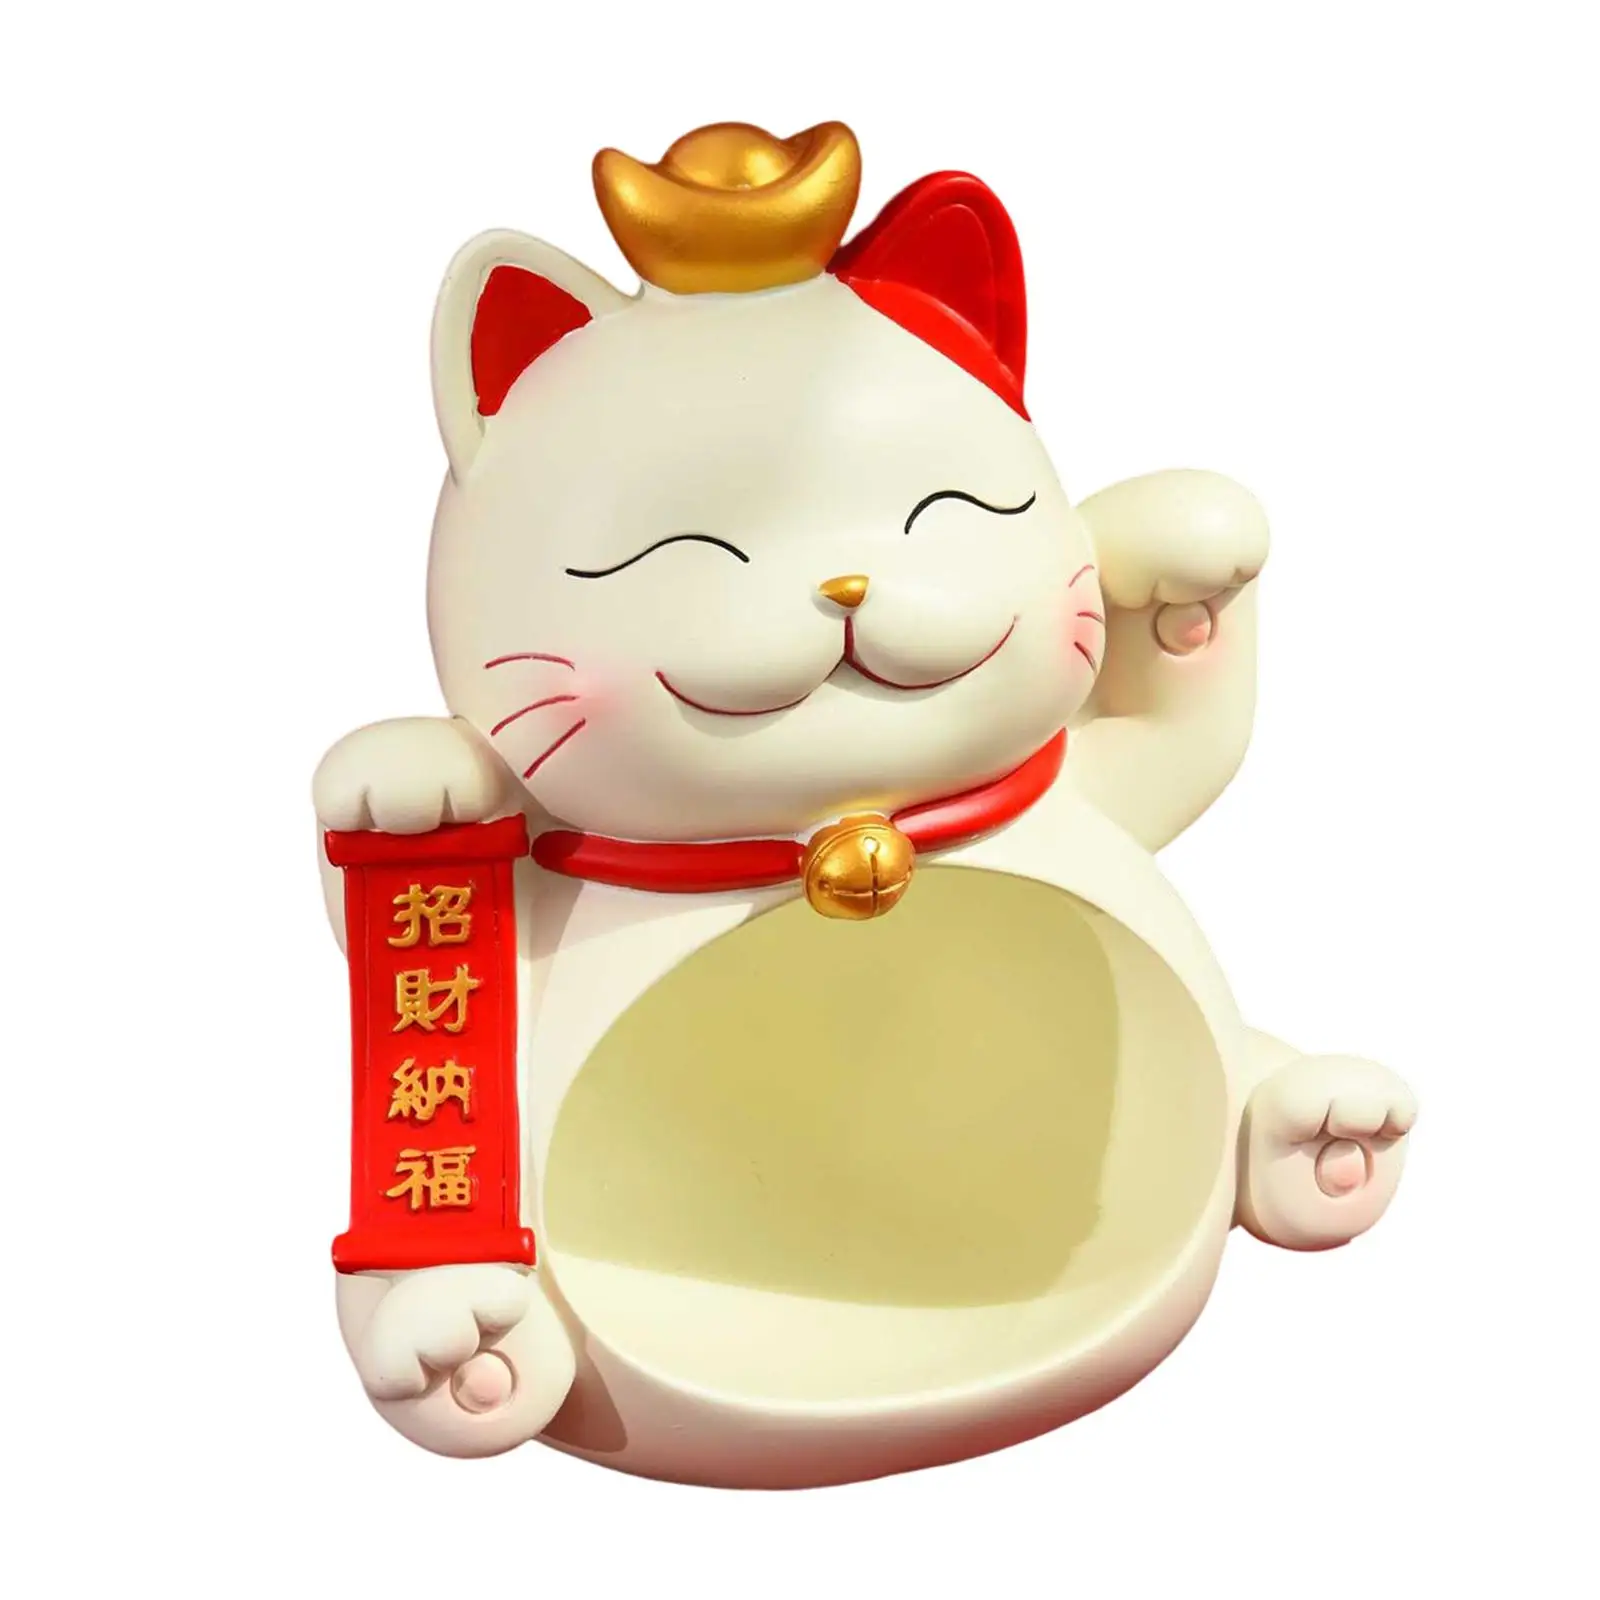 Multipurpose Cat Sculpture Storage Tray Desk Sundries Container Ornament Statue for Living Room Home Office Cabinet Decor